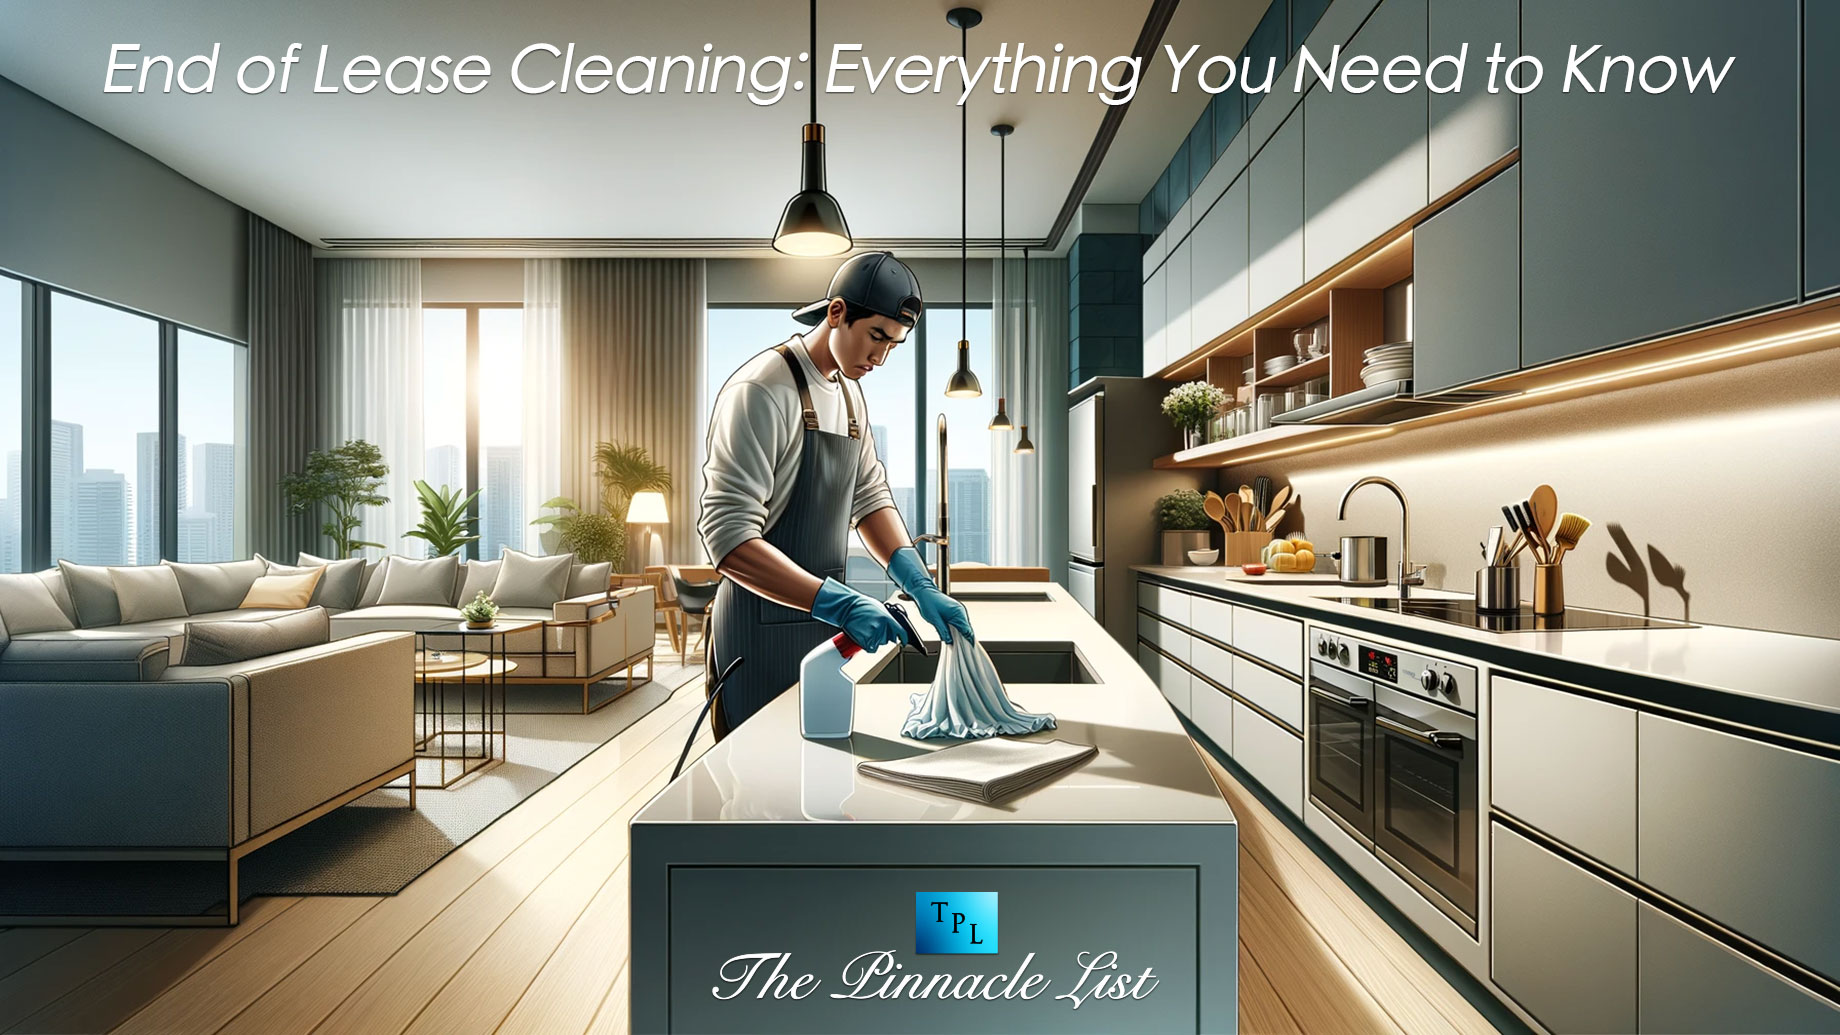 End of Lease Cleaning: Everything You Need to Know